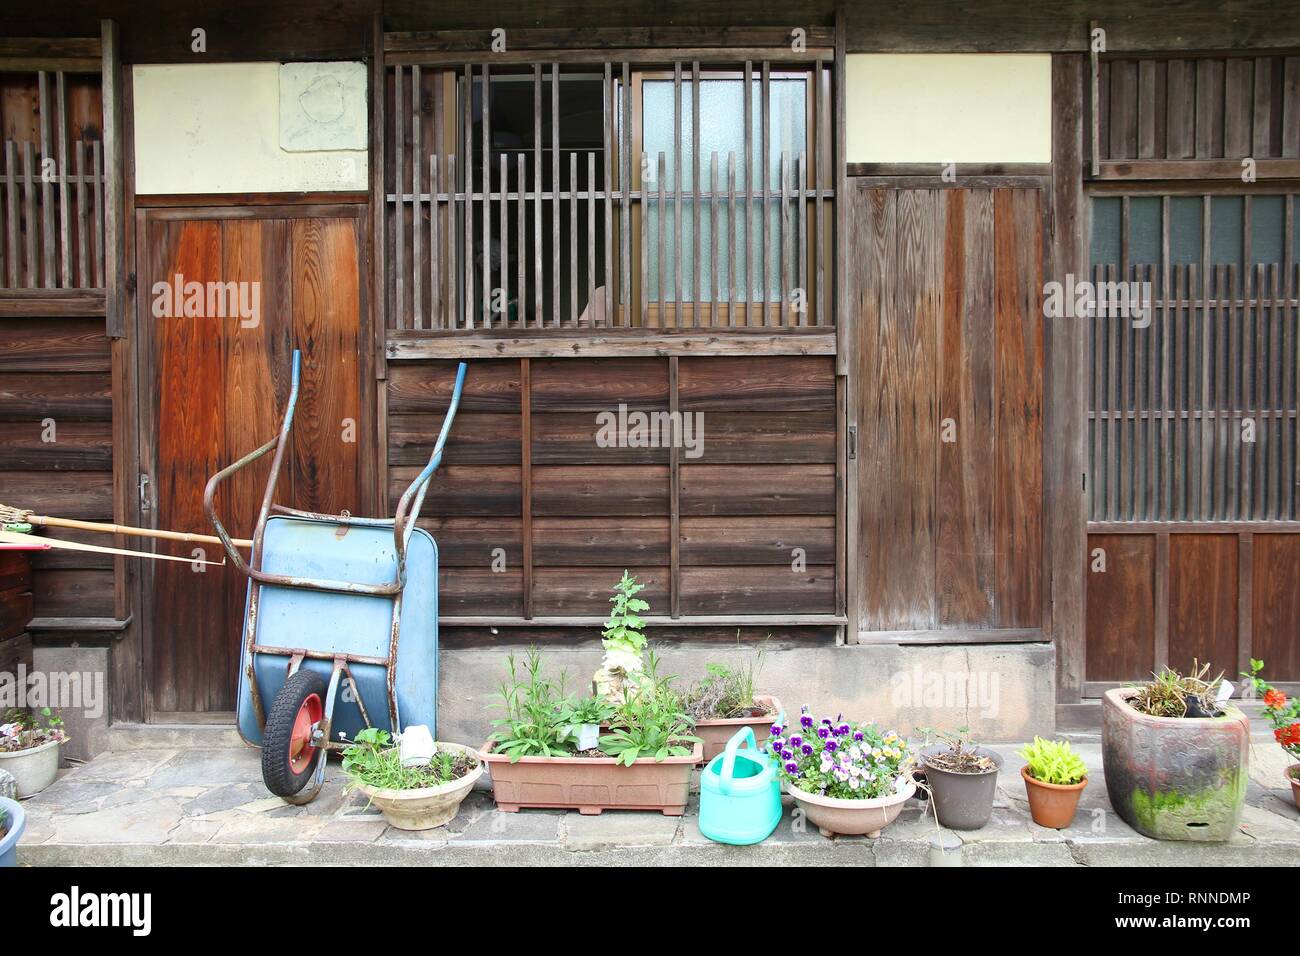 Japan - famous Tsumago old town. Wooden Japanese architecture. Stock Photo